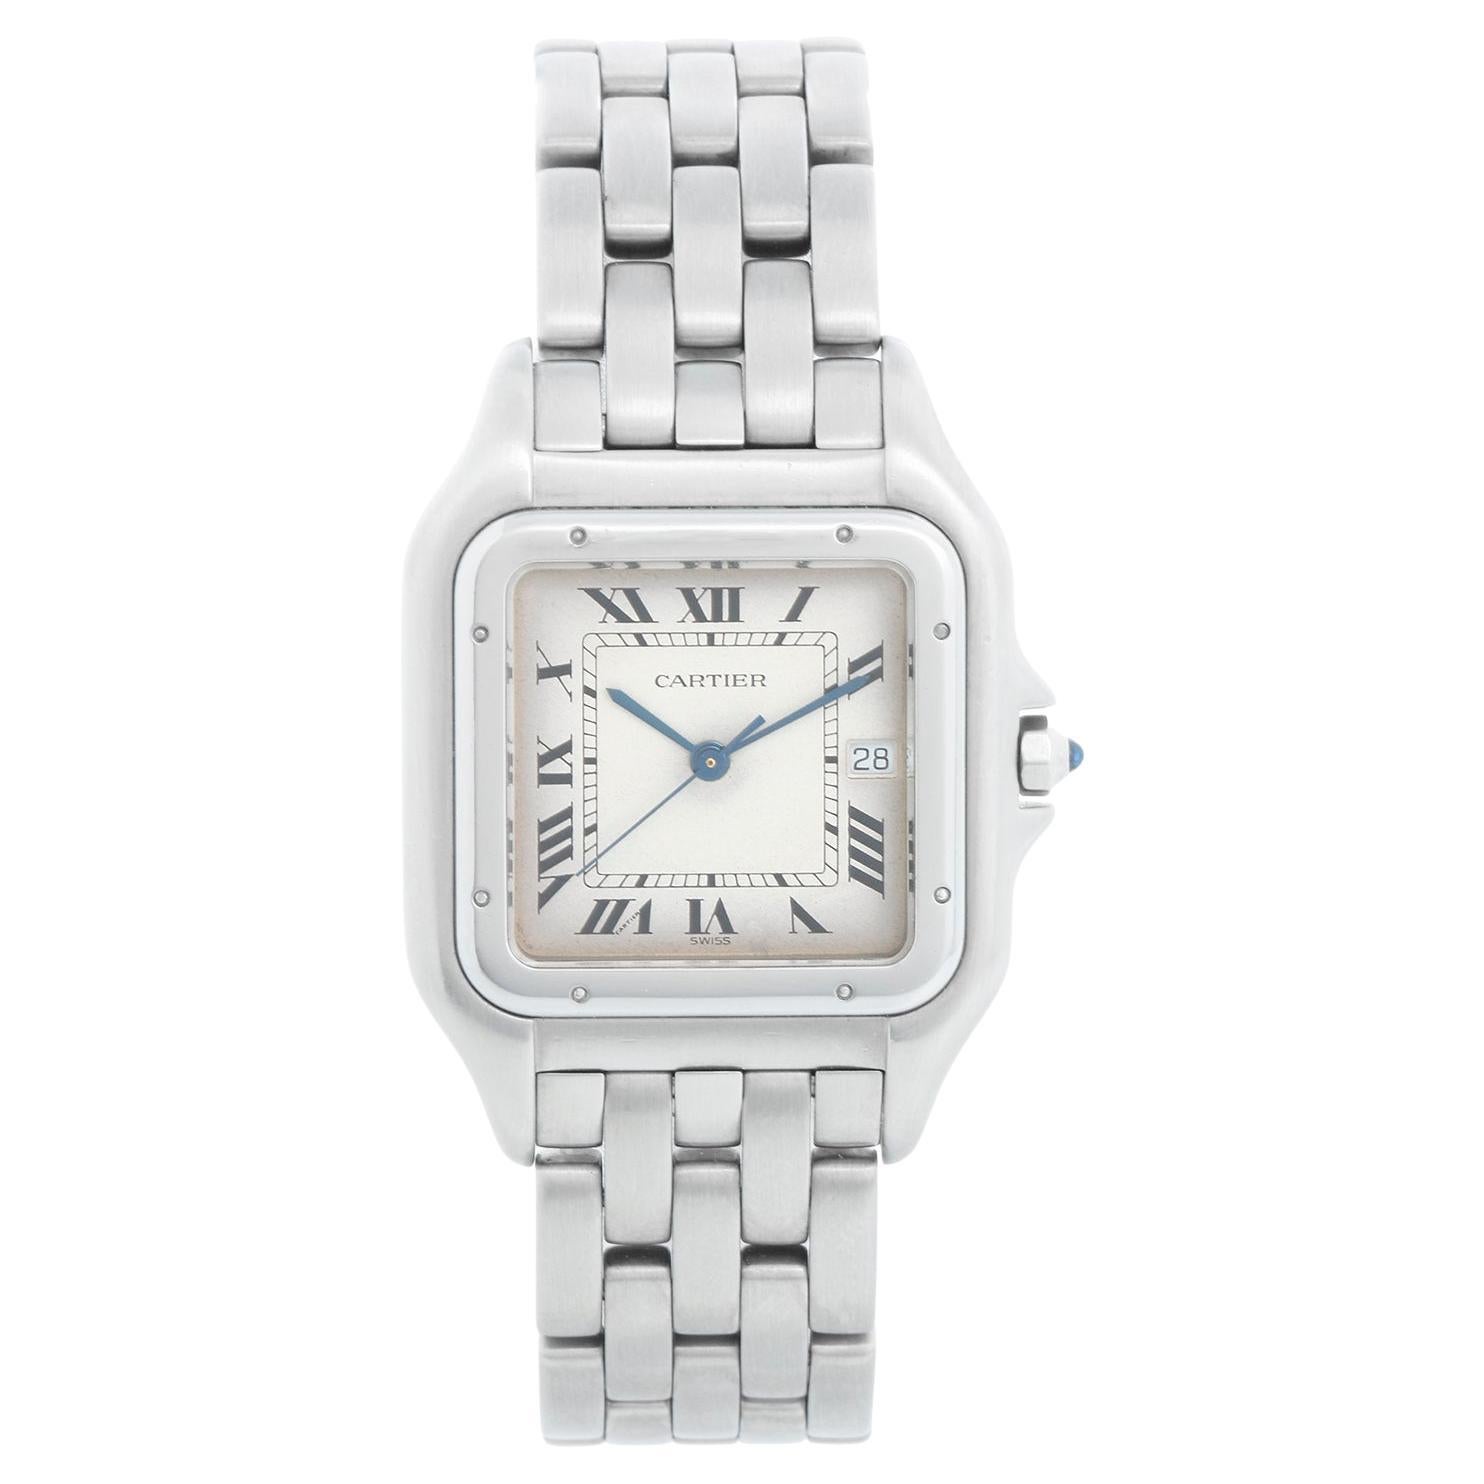 Cartier Jumbo Panther Stainless Steel Men's Quartz Watch with Date For Sale